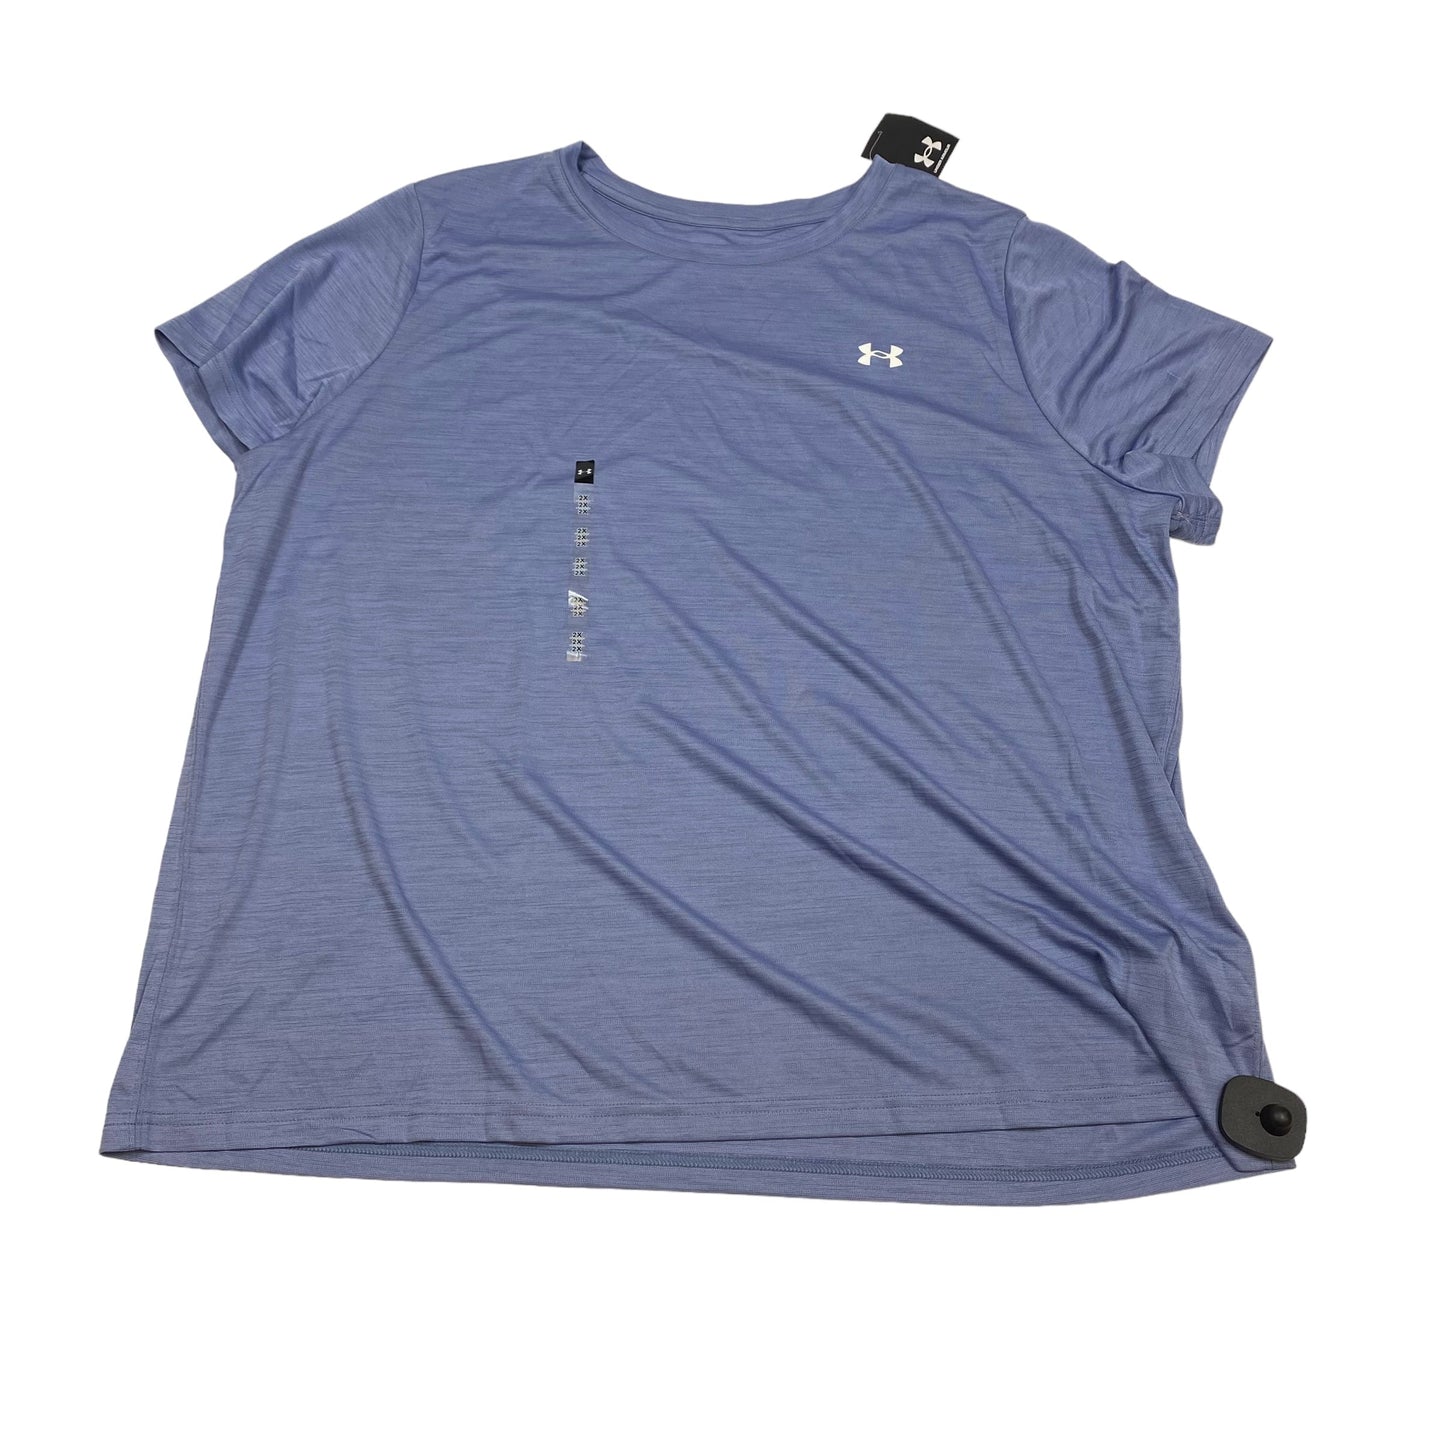 Blue Athletic Top Short Sleeve Under Armour, Size 2x